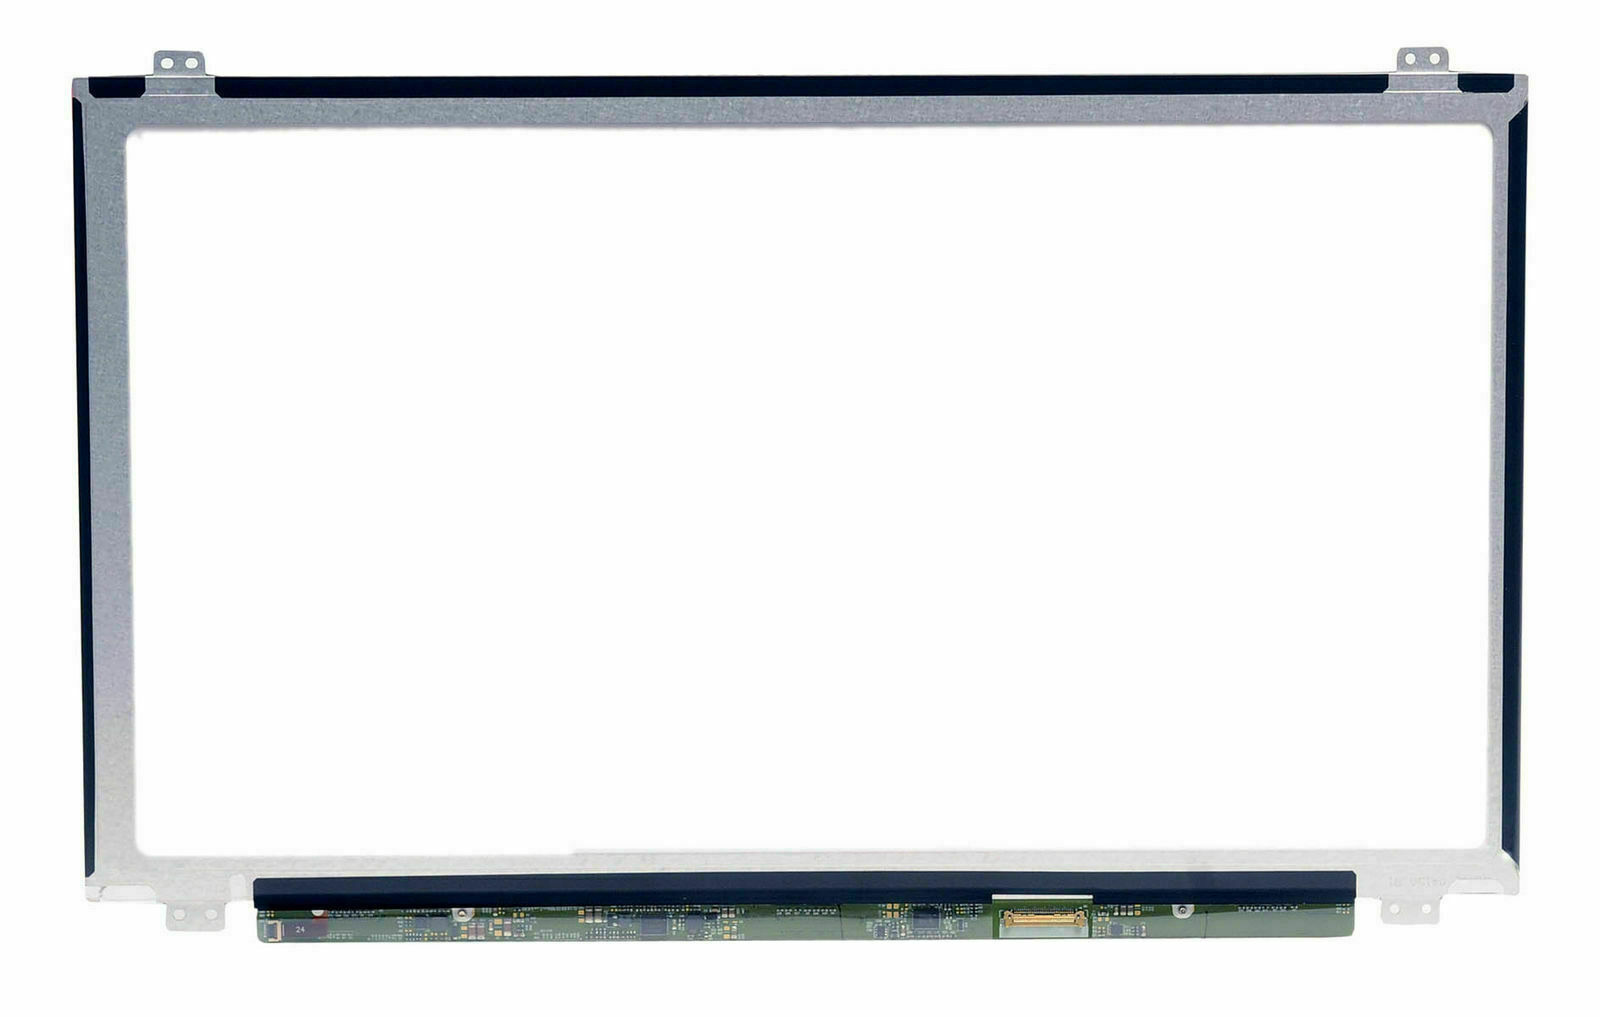 Primary image for 15.6" FHD IPS LAPTOP LCD SCREEN NV156FHM-N49 V8.0 compatible FRU 01HY450 01LW399